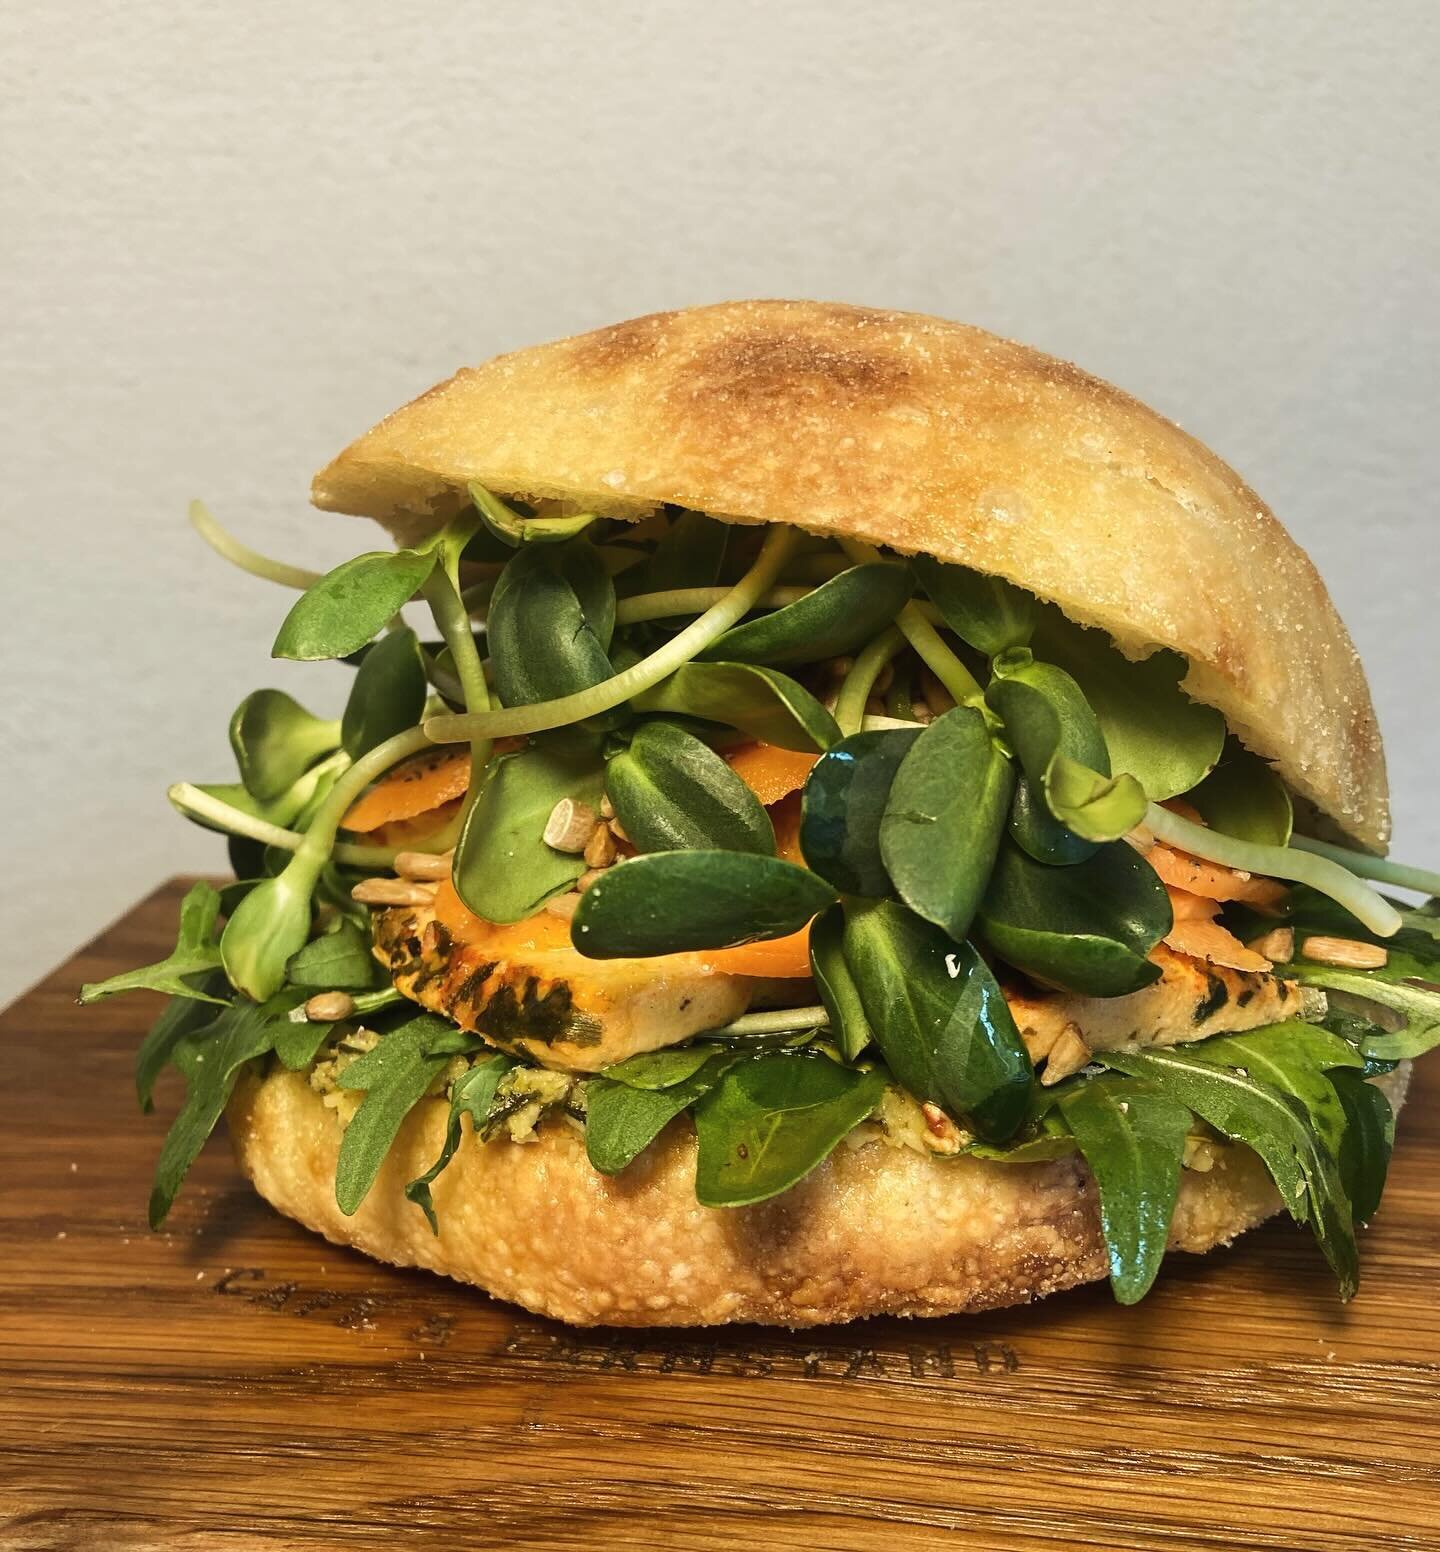 New menu item! FILLED FOCACCIA! 
Grilled Olive Tapenade, Rocket Salad, Cashew Cheeze (bruschetta flavour), Chilli Pickled Carrots, Sunflower Shoots &amp; Roasted Sunflower Seeds in a Perfectly fluffy Focaccia bun! 💥 

Yeah it&rsquo;s as good as it s